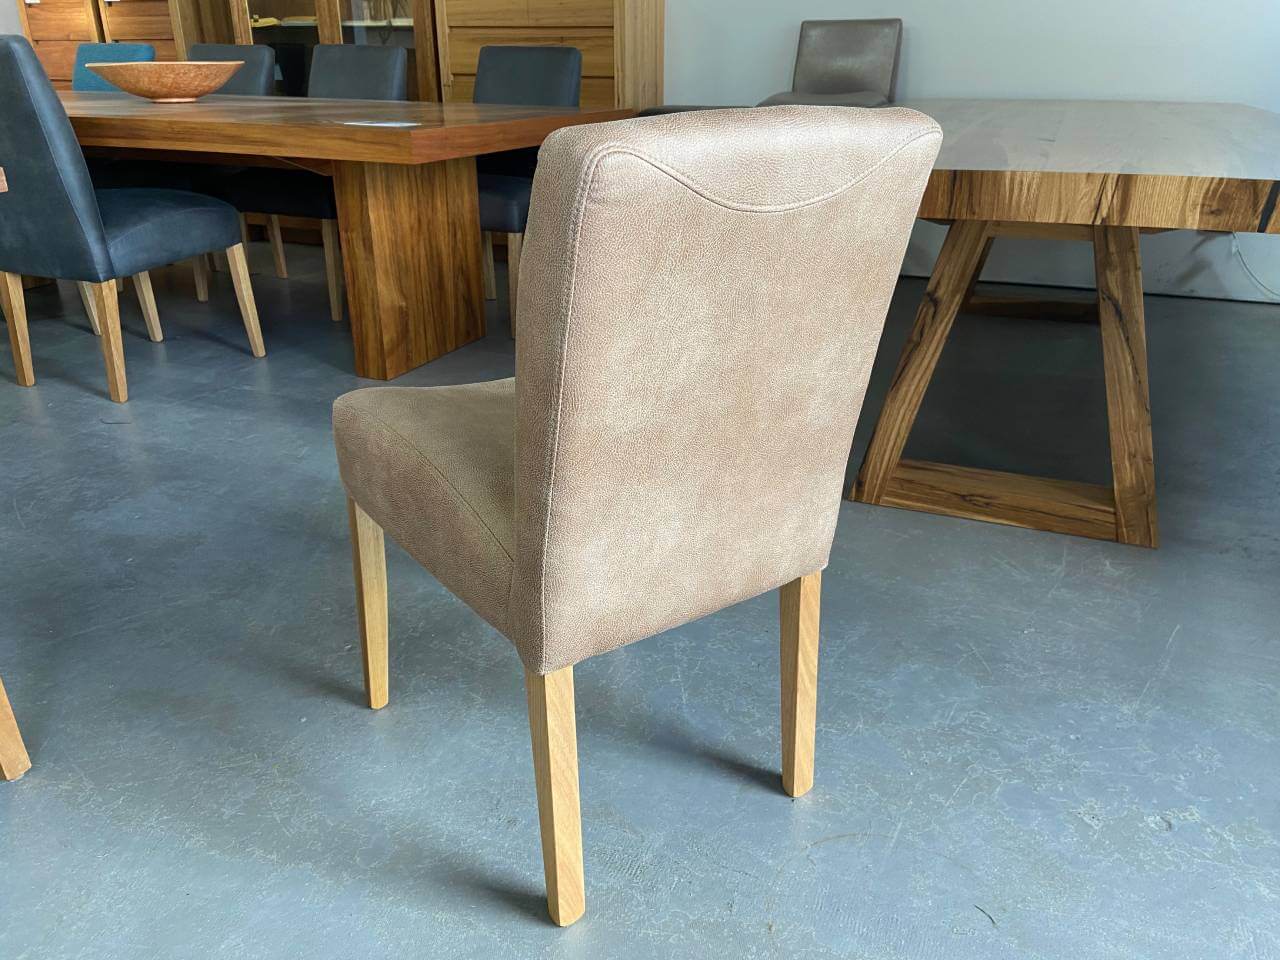 Hobart Upholstered Dining Chairs Warwick Eastwood Fawn Fabric Oak Timber Quality Made in Adelaide, South Australia